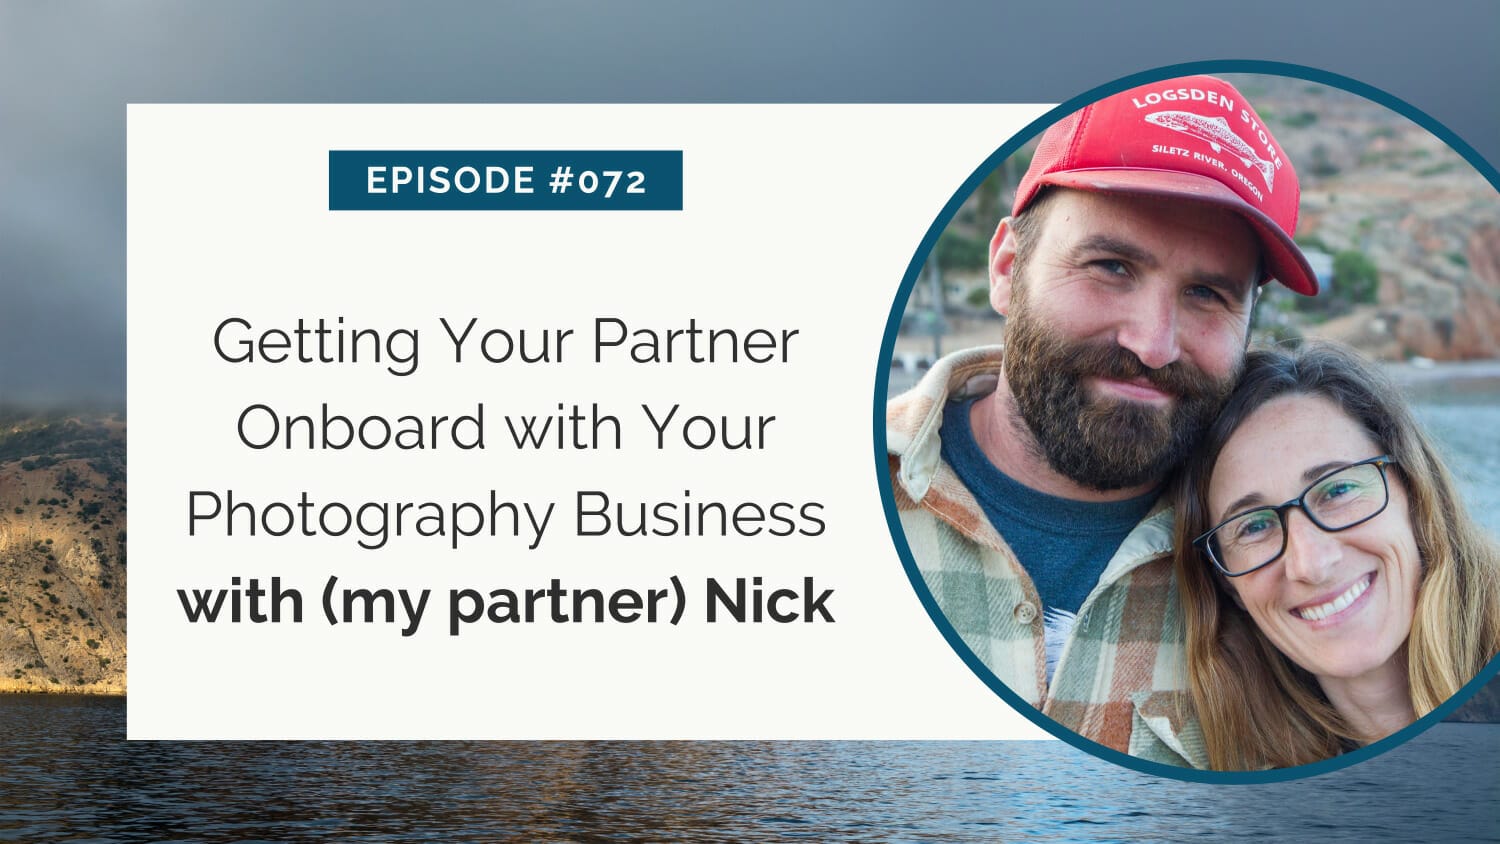 Podcast episode graphic featuring two people smiling with text about getting your partner involved in a photography business.